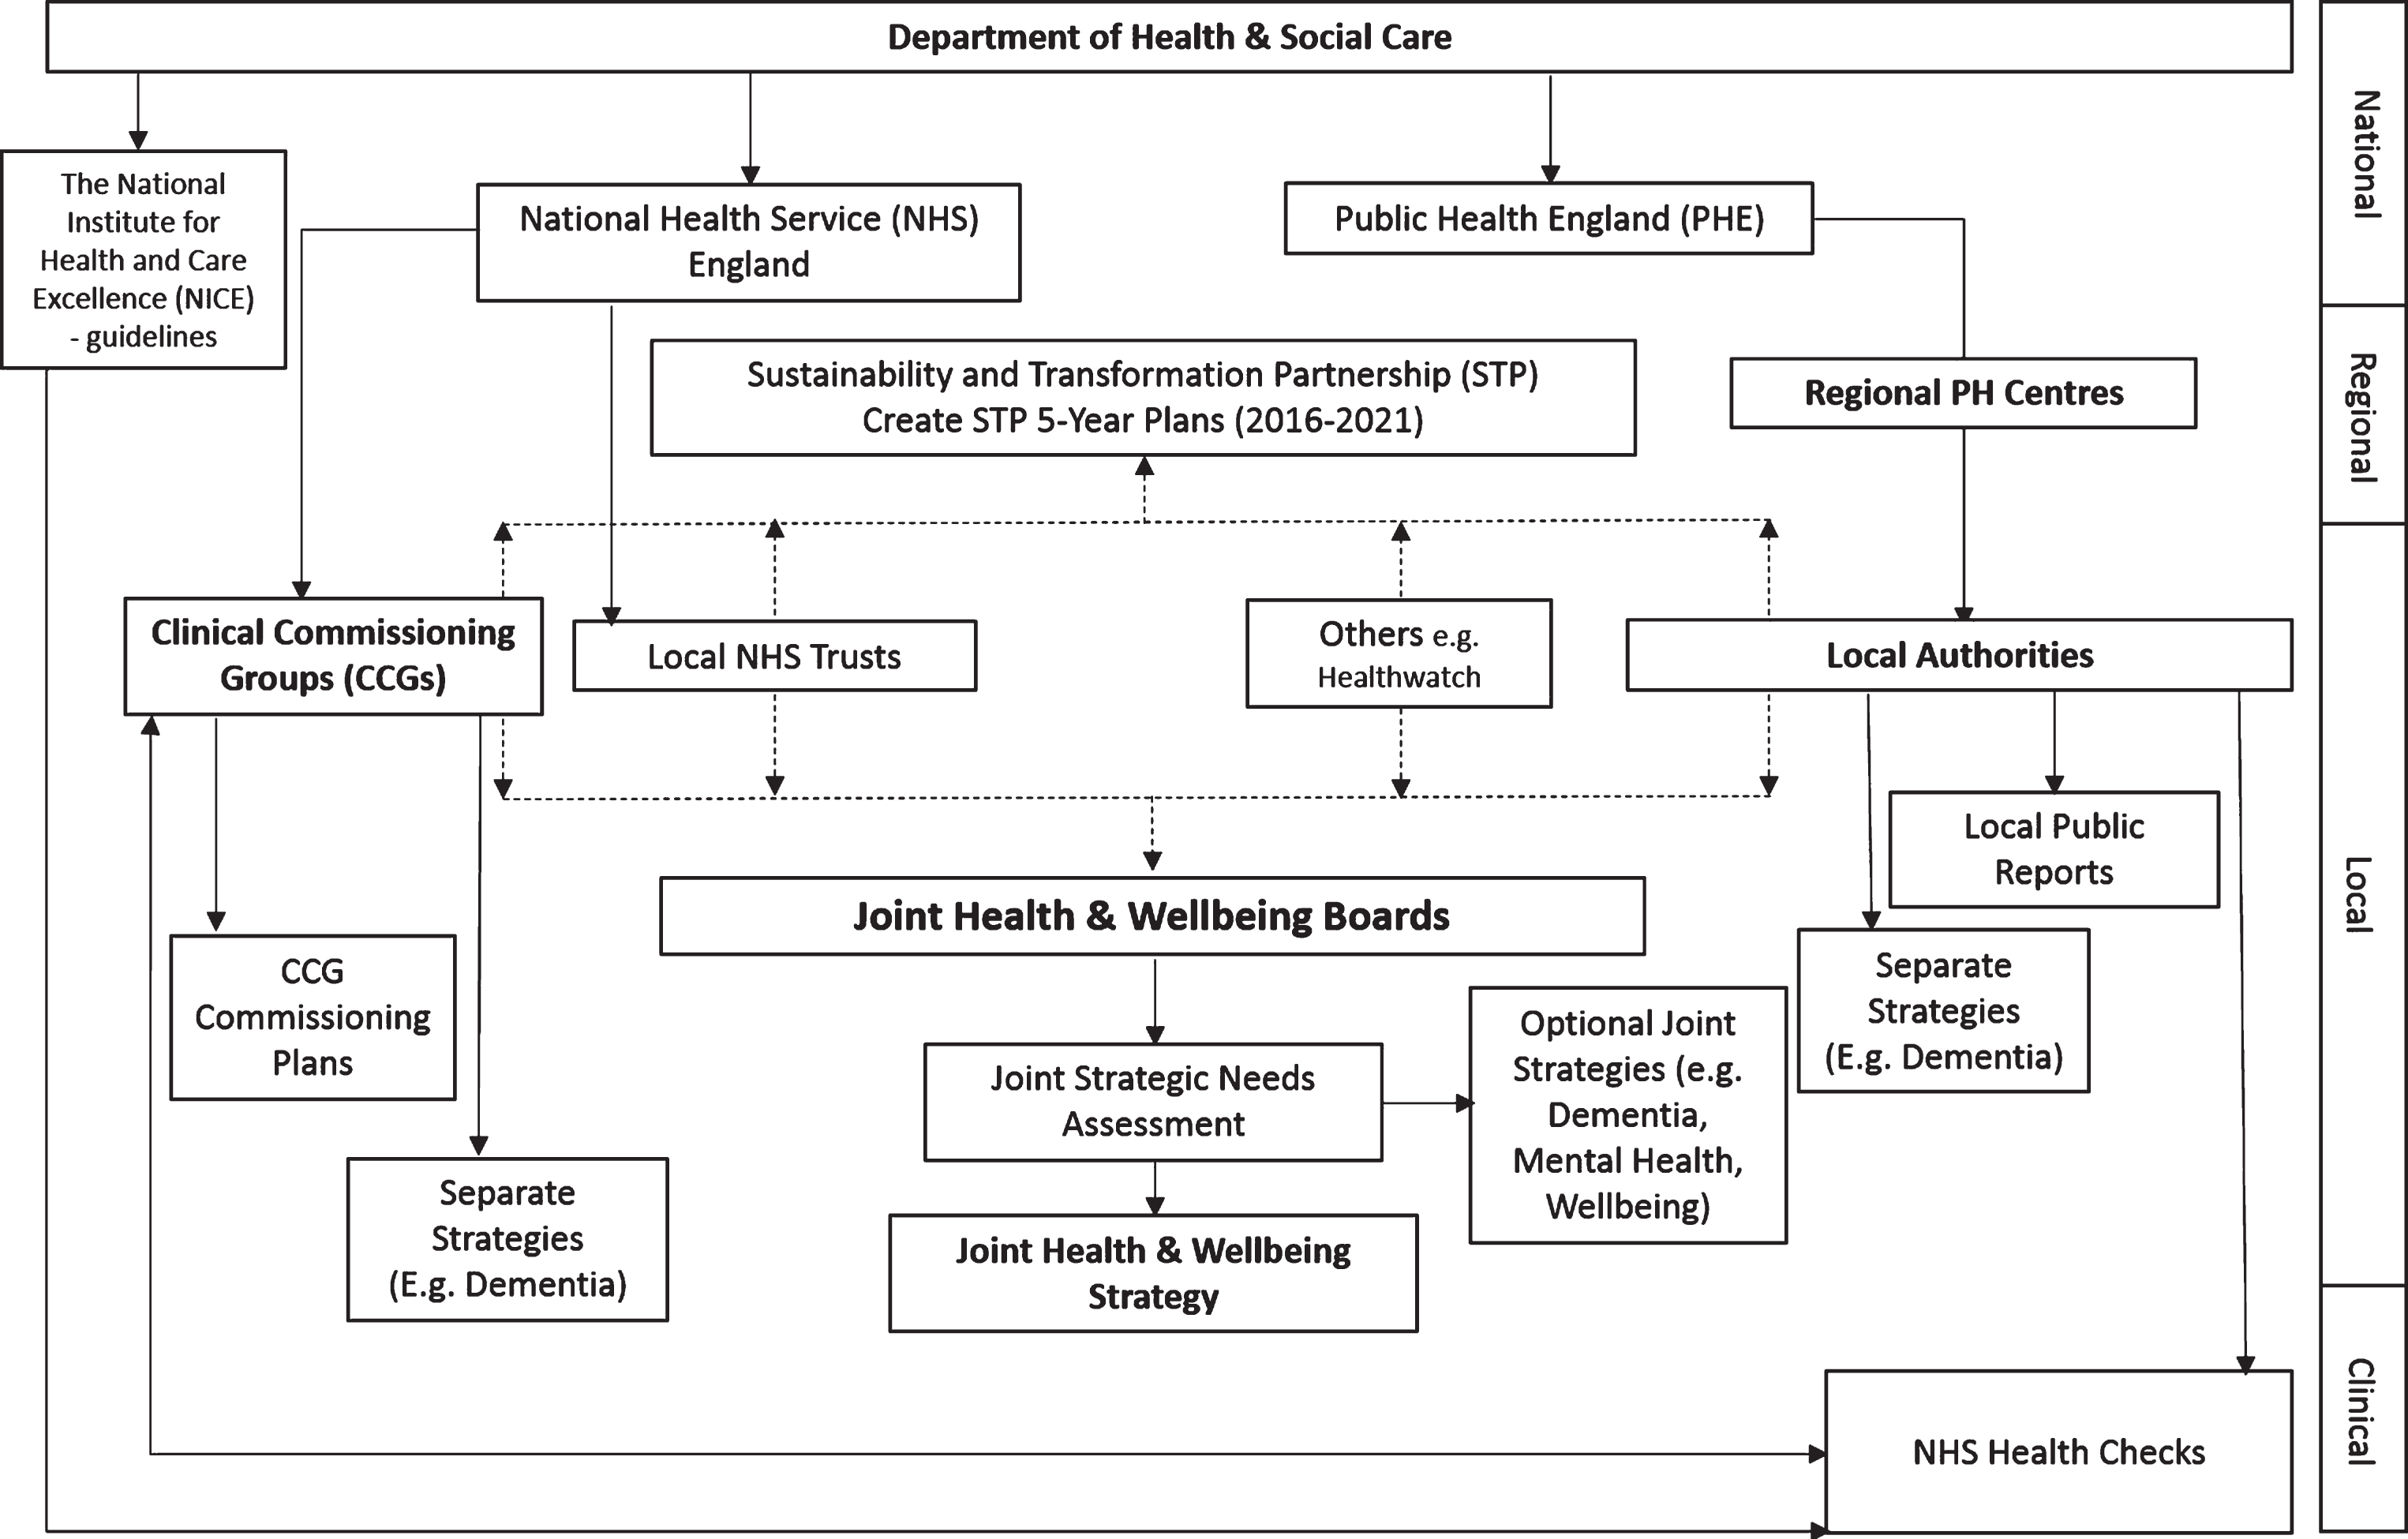 Structure of the England’s Department of Health & Social Care, health care commissioning bodies, and flow of policies from national to clinical level.